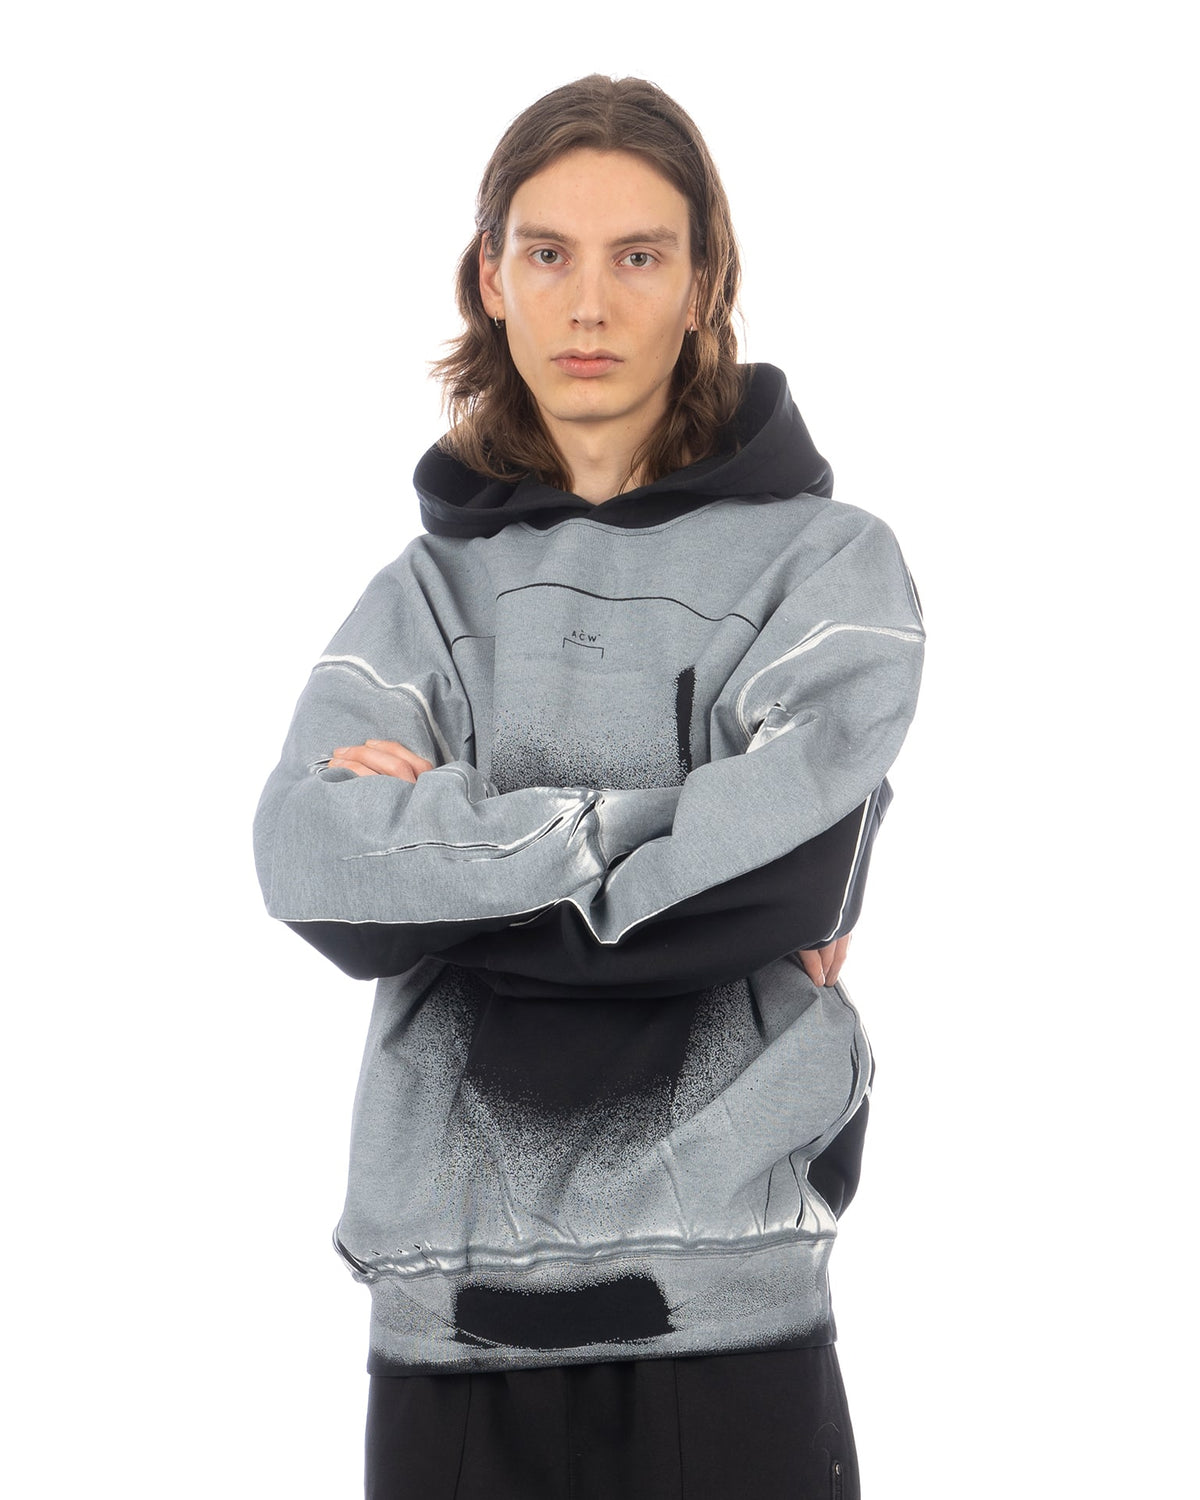 A-COLD-WALL* | Exposure Hoodie Black - Concrete